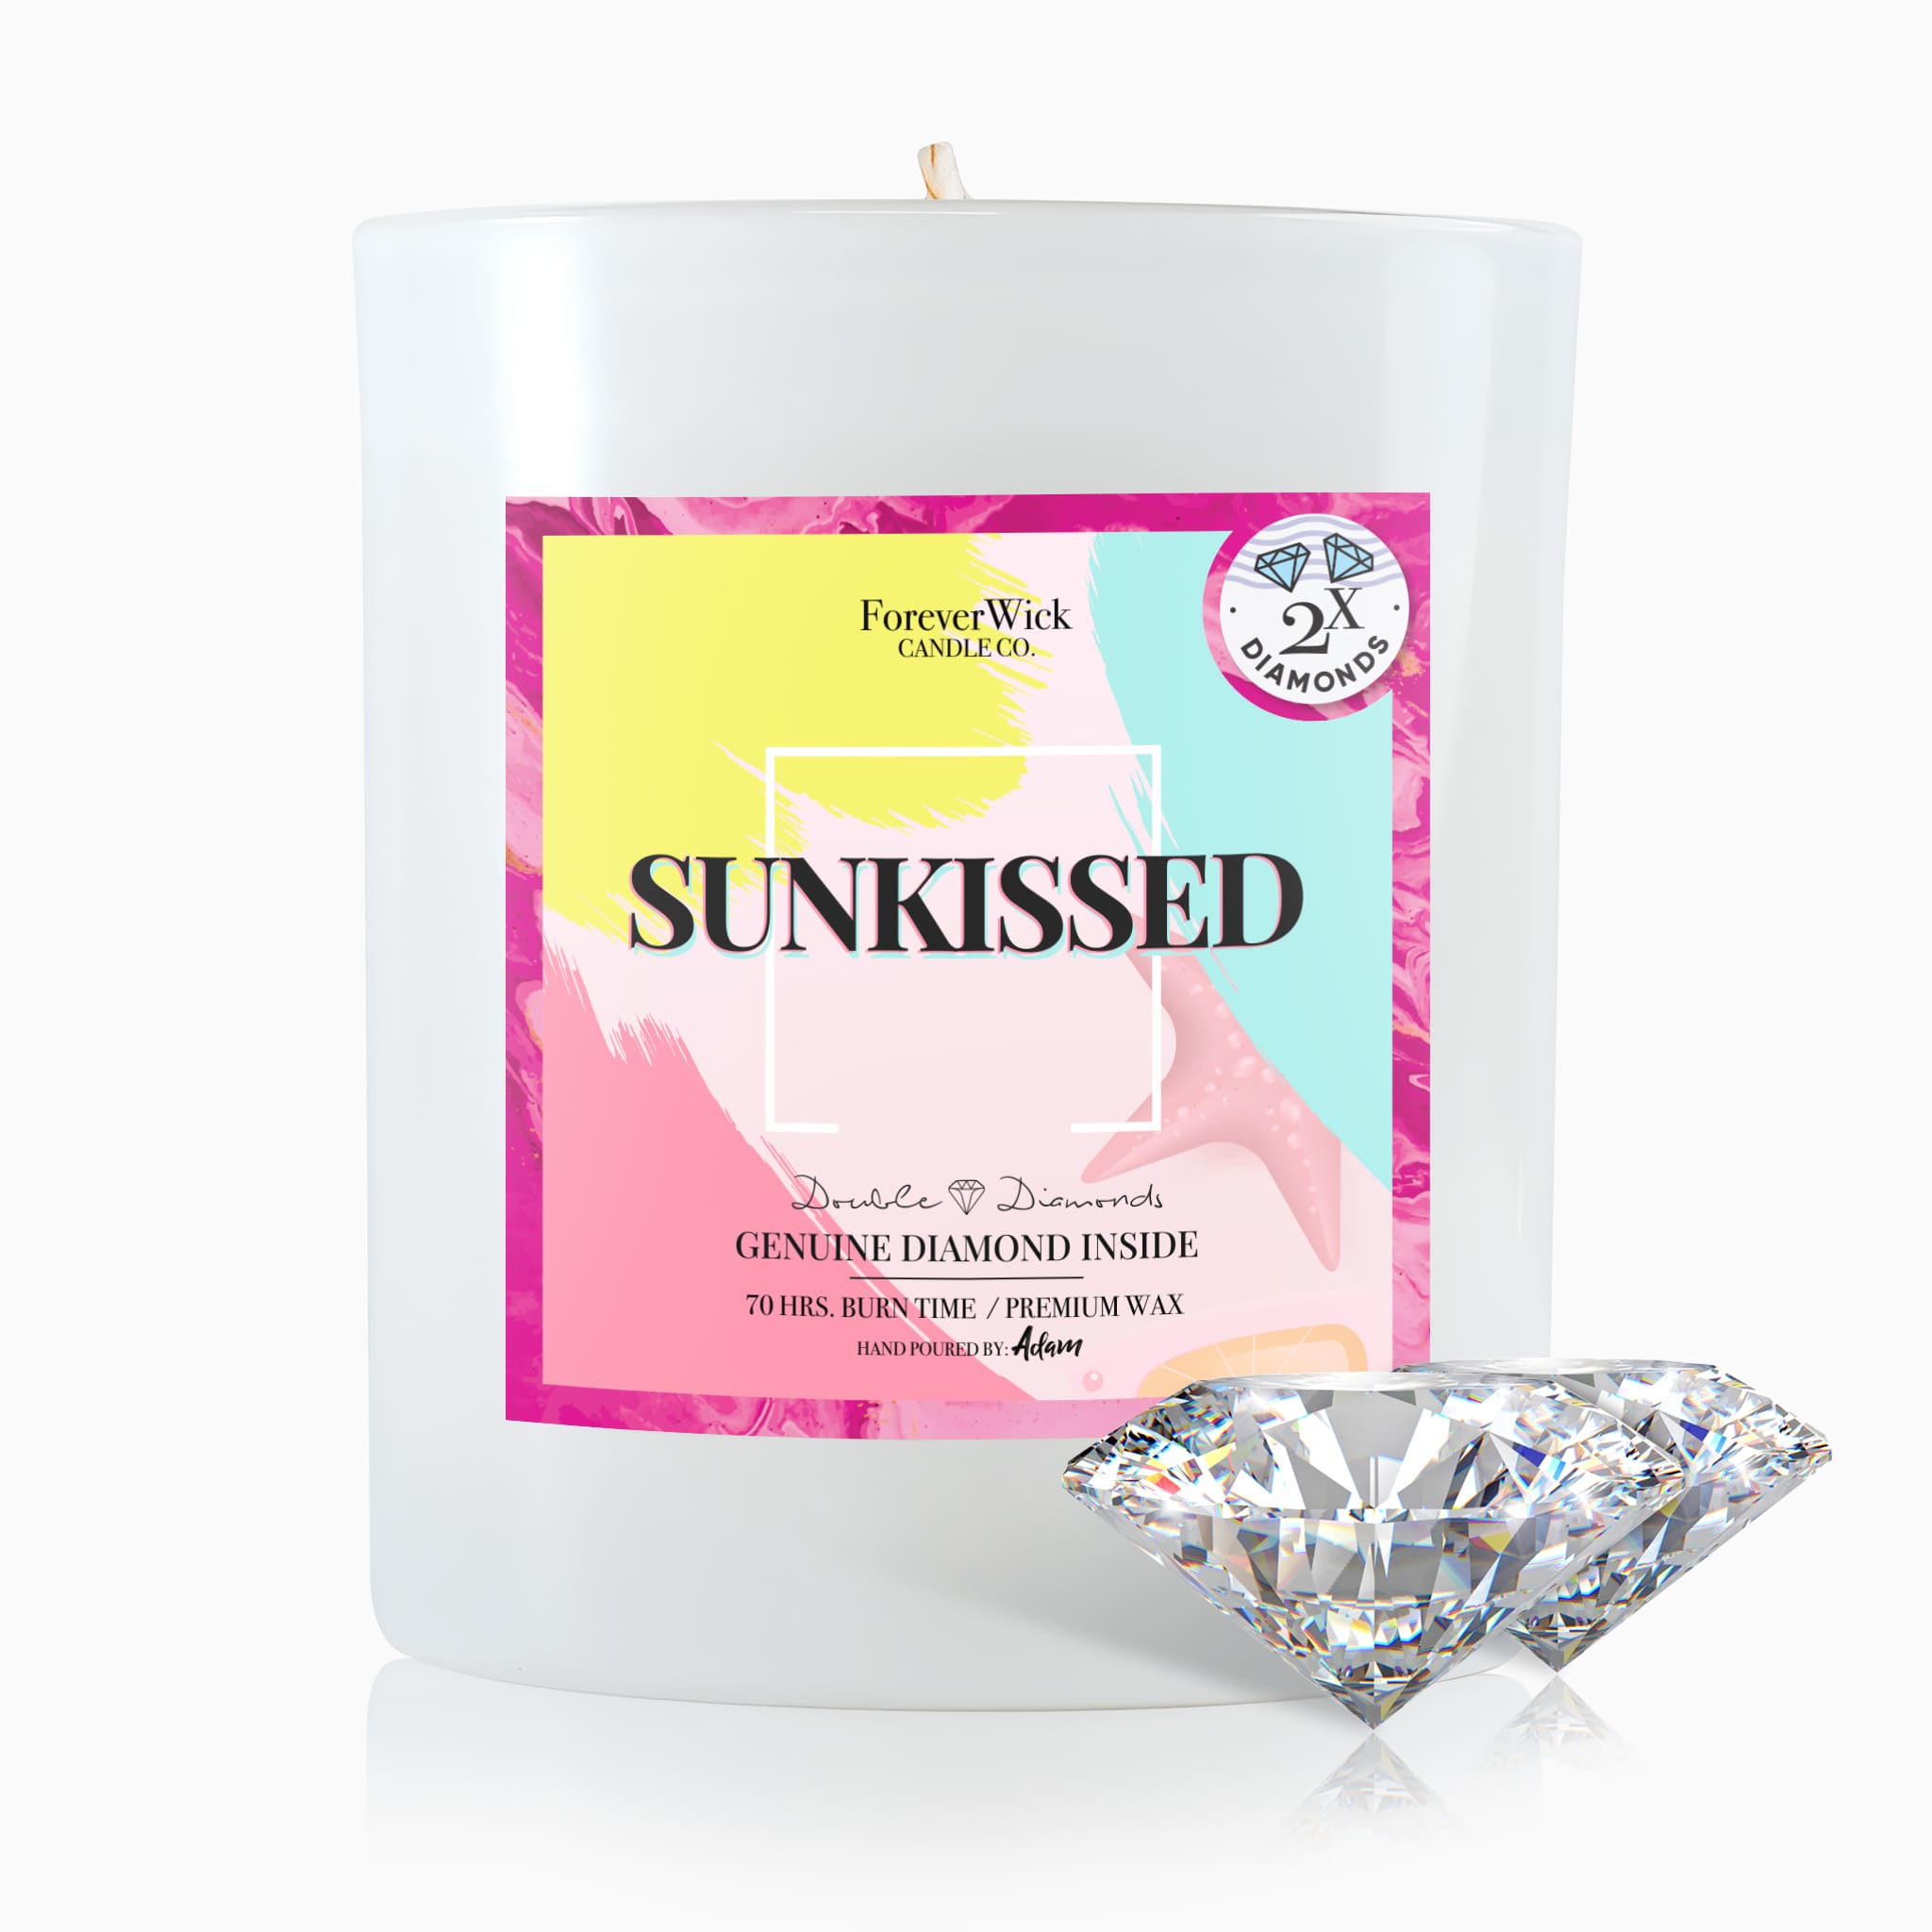 Sunkissed Double Diamond Candle